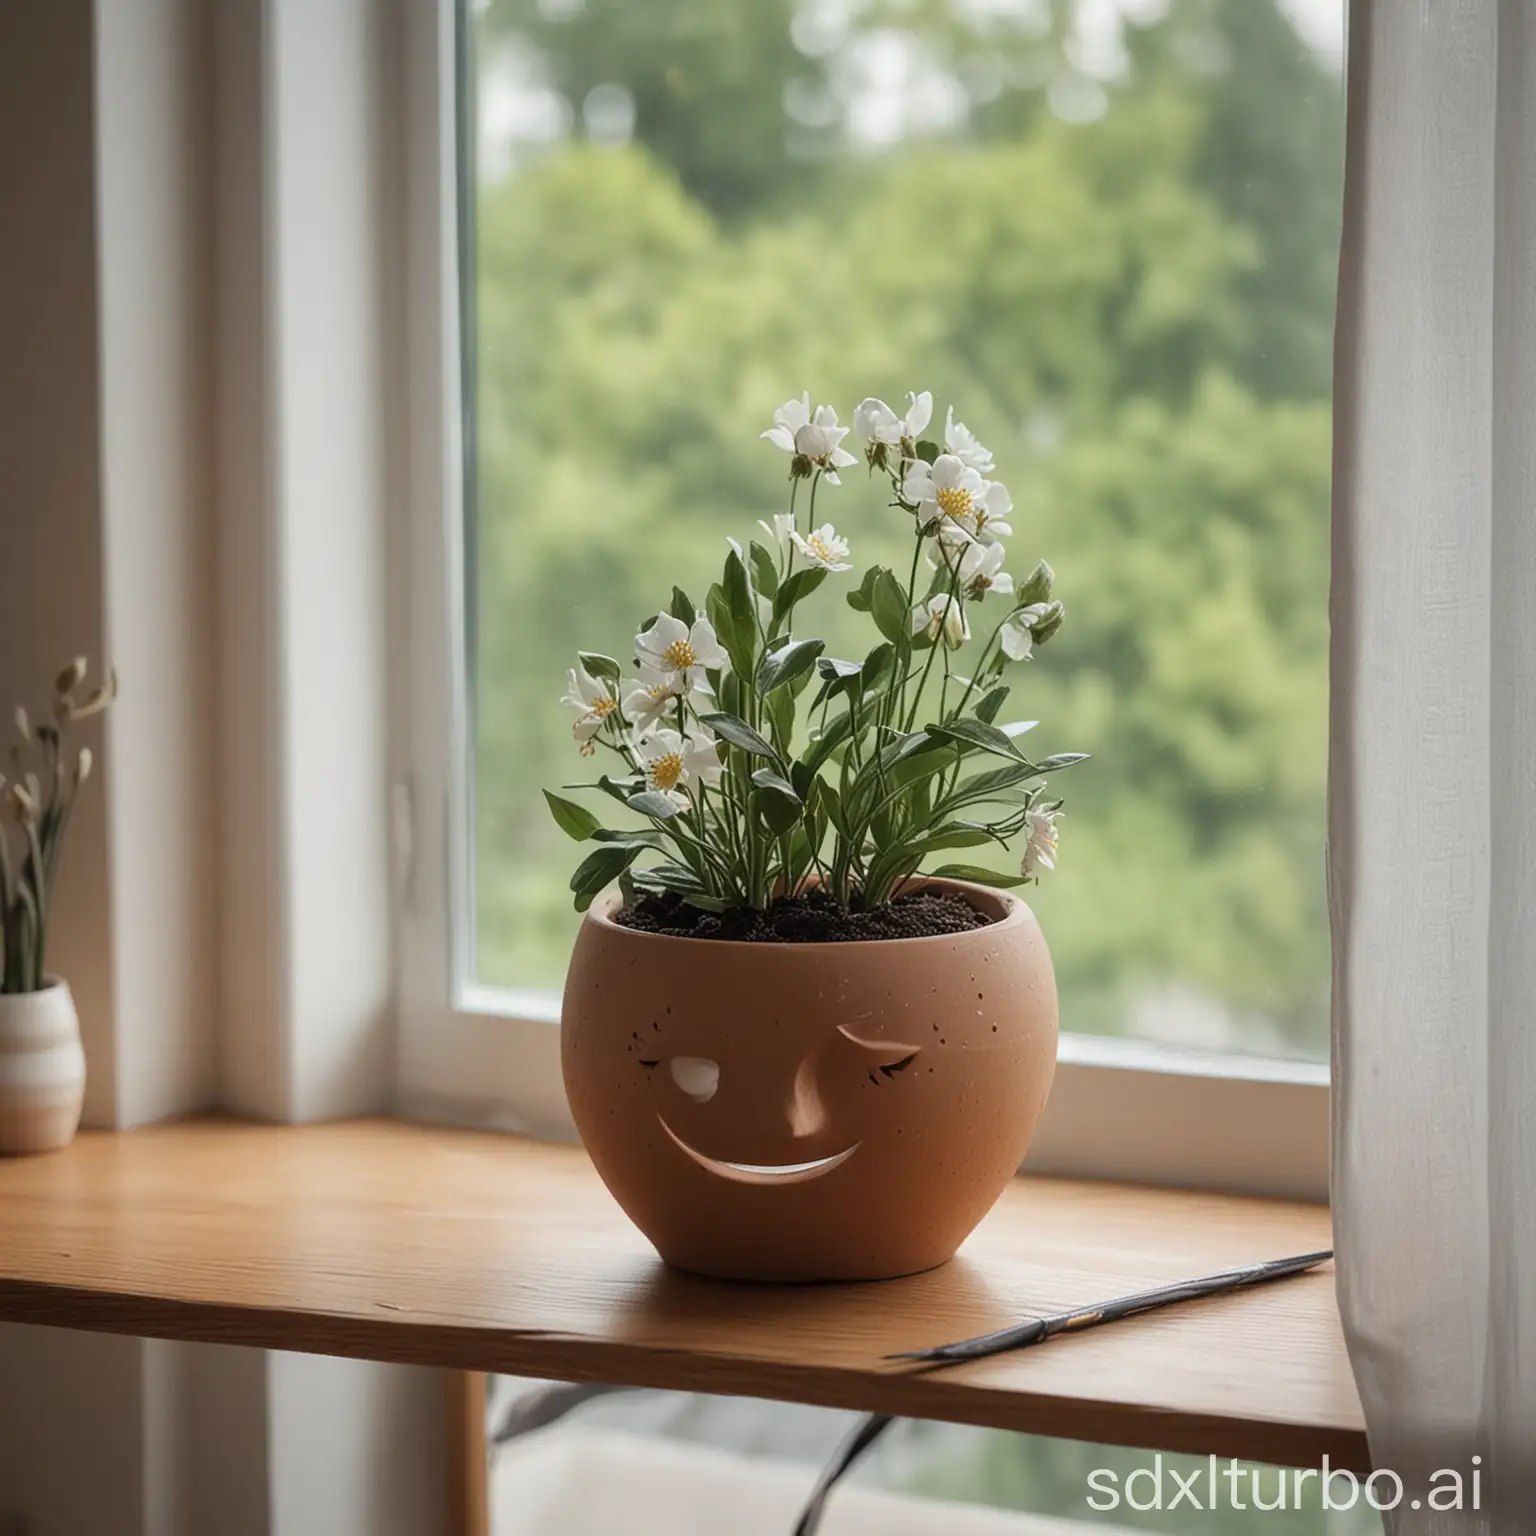 a nice crescent-moon-shaped flower pot placed on the desk near the window